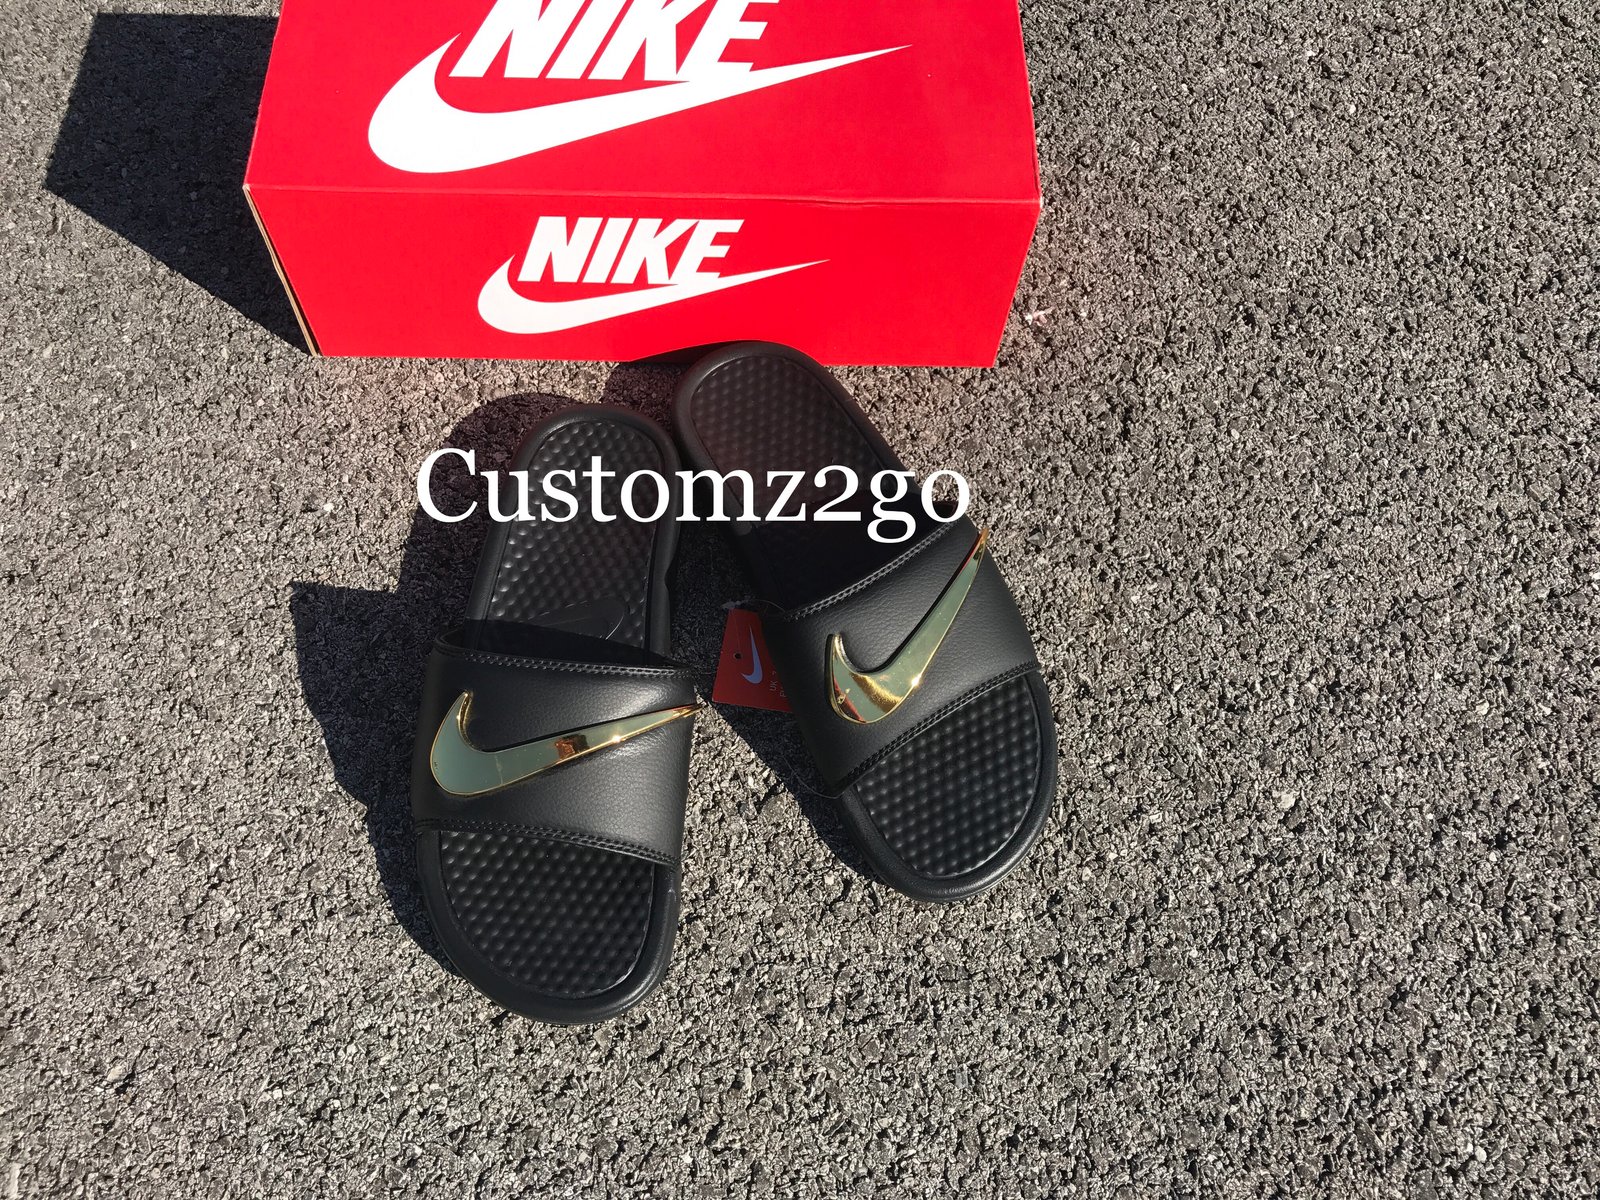 nike slides red with gold check